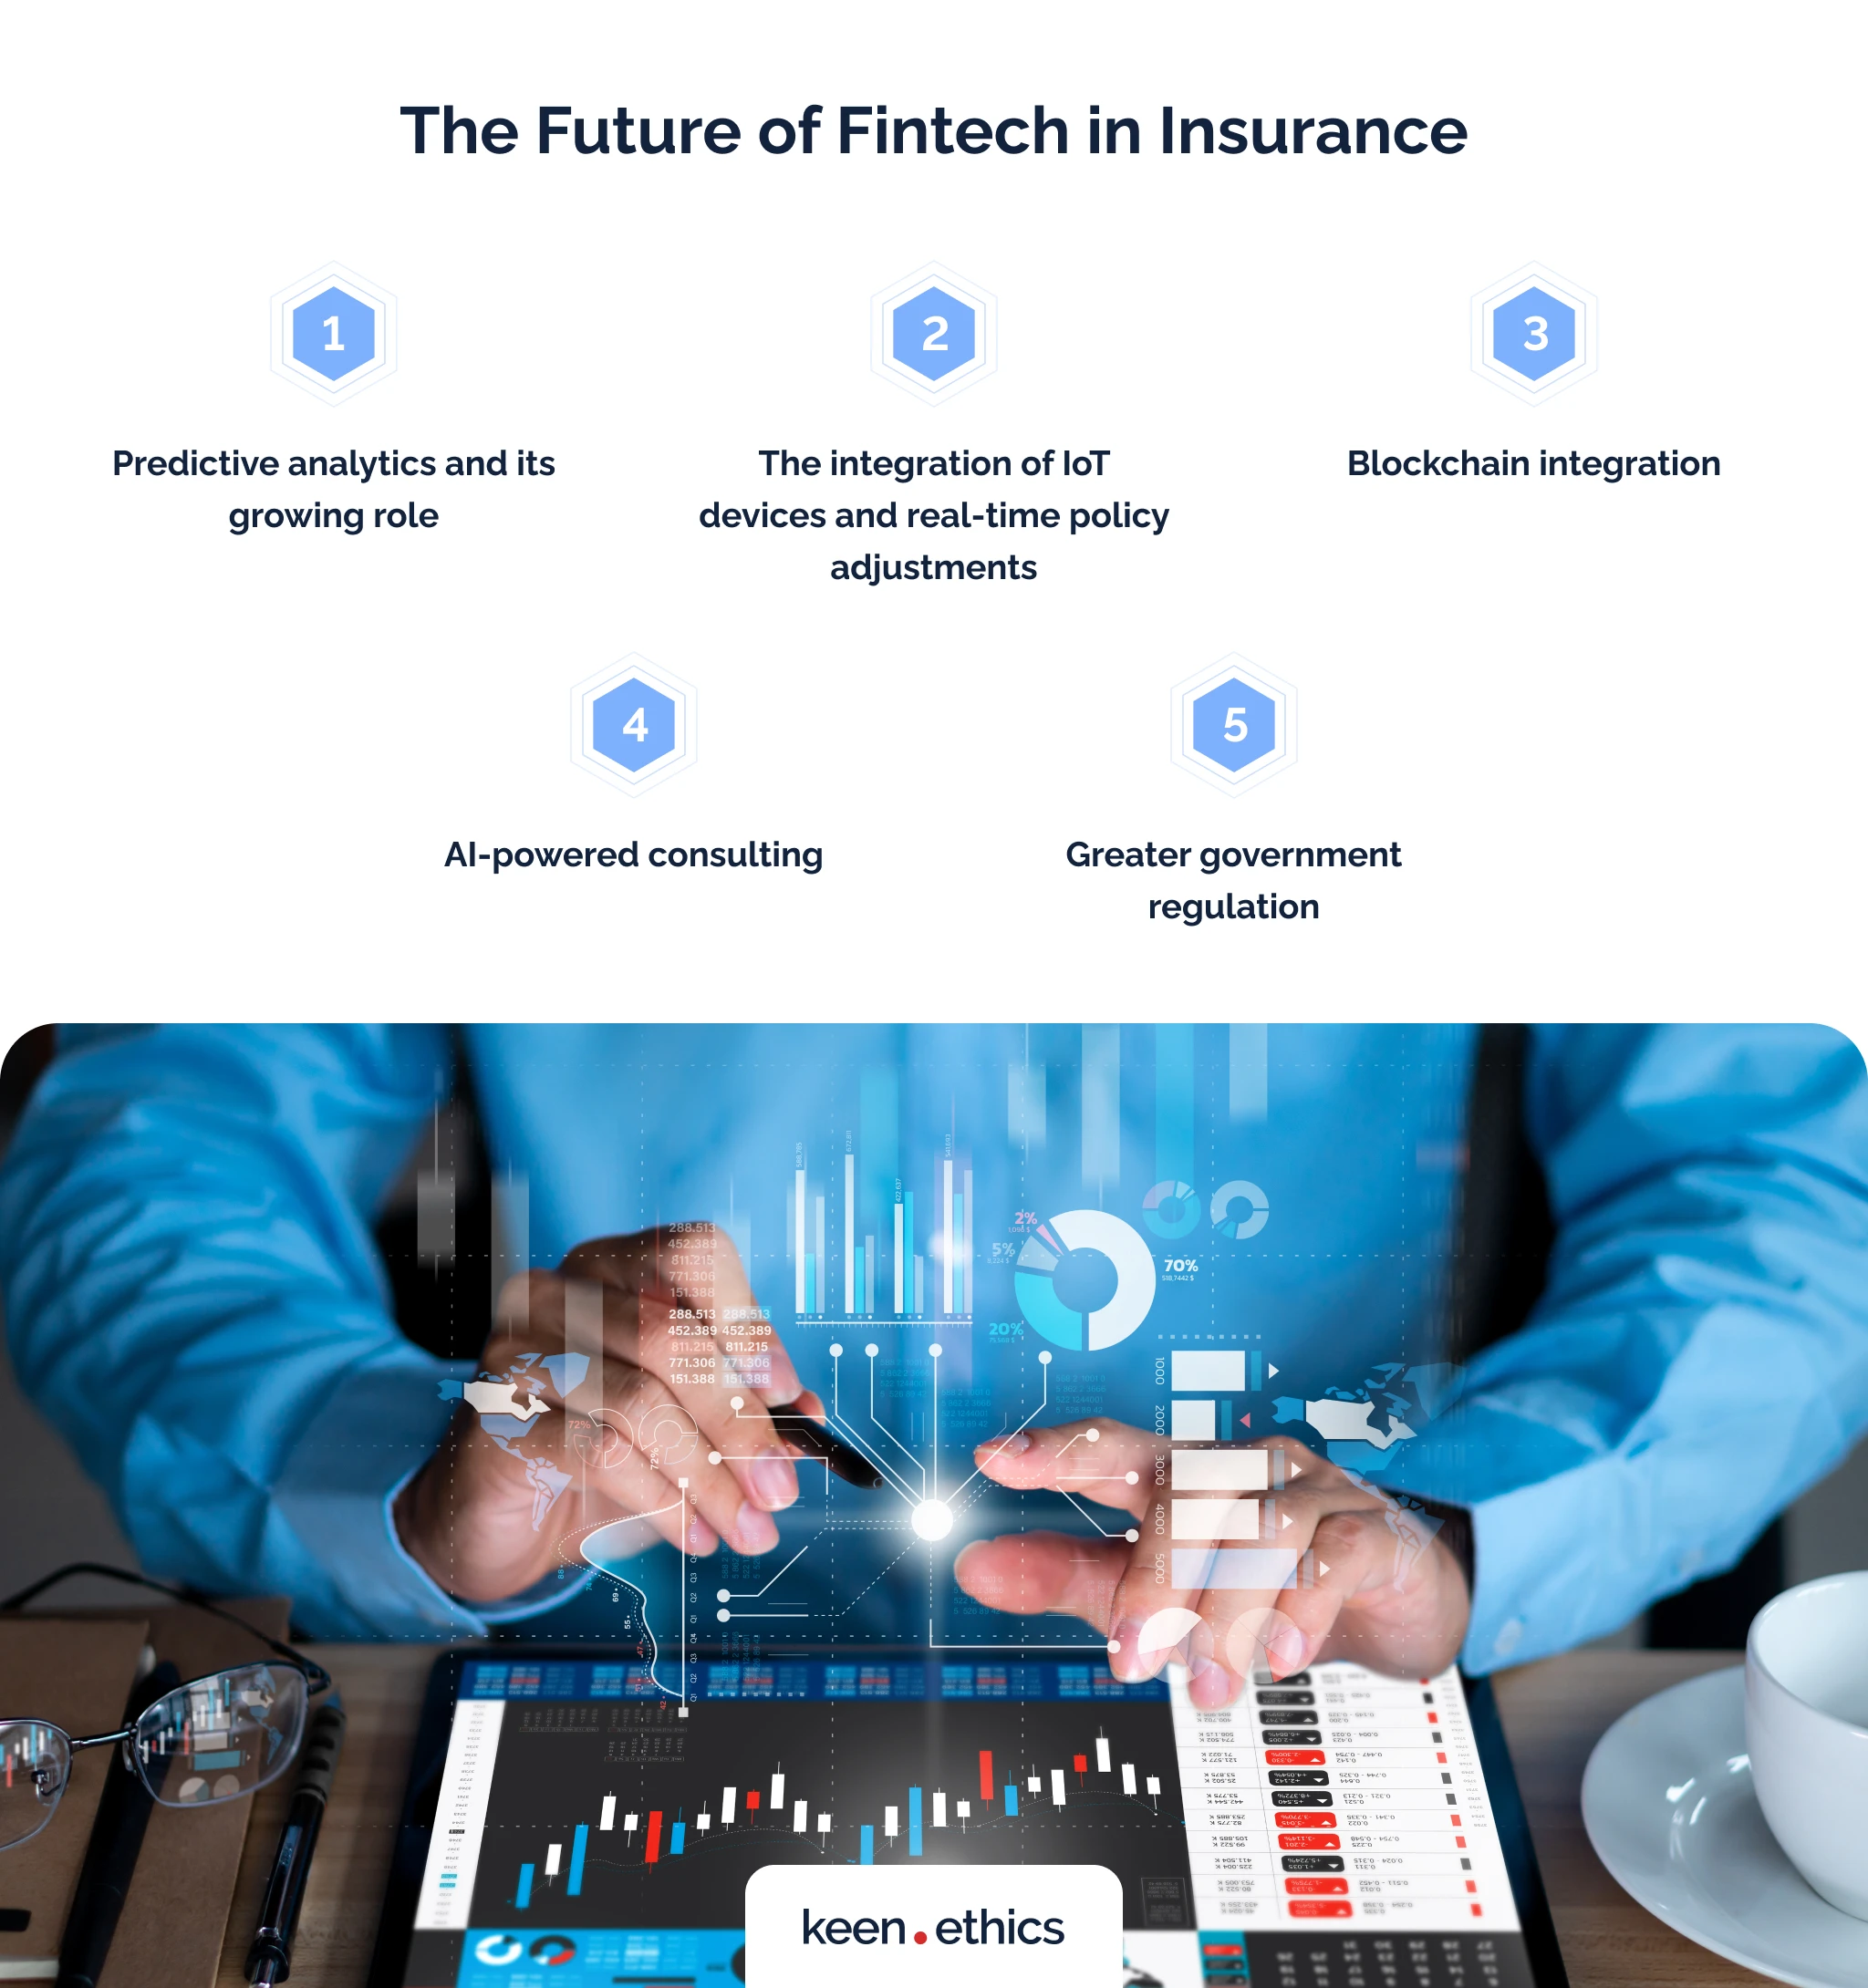 The future of fintech in insurance